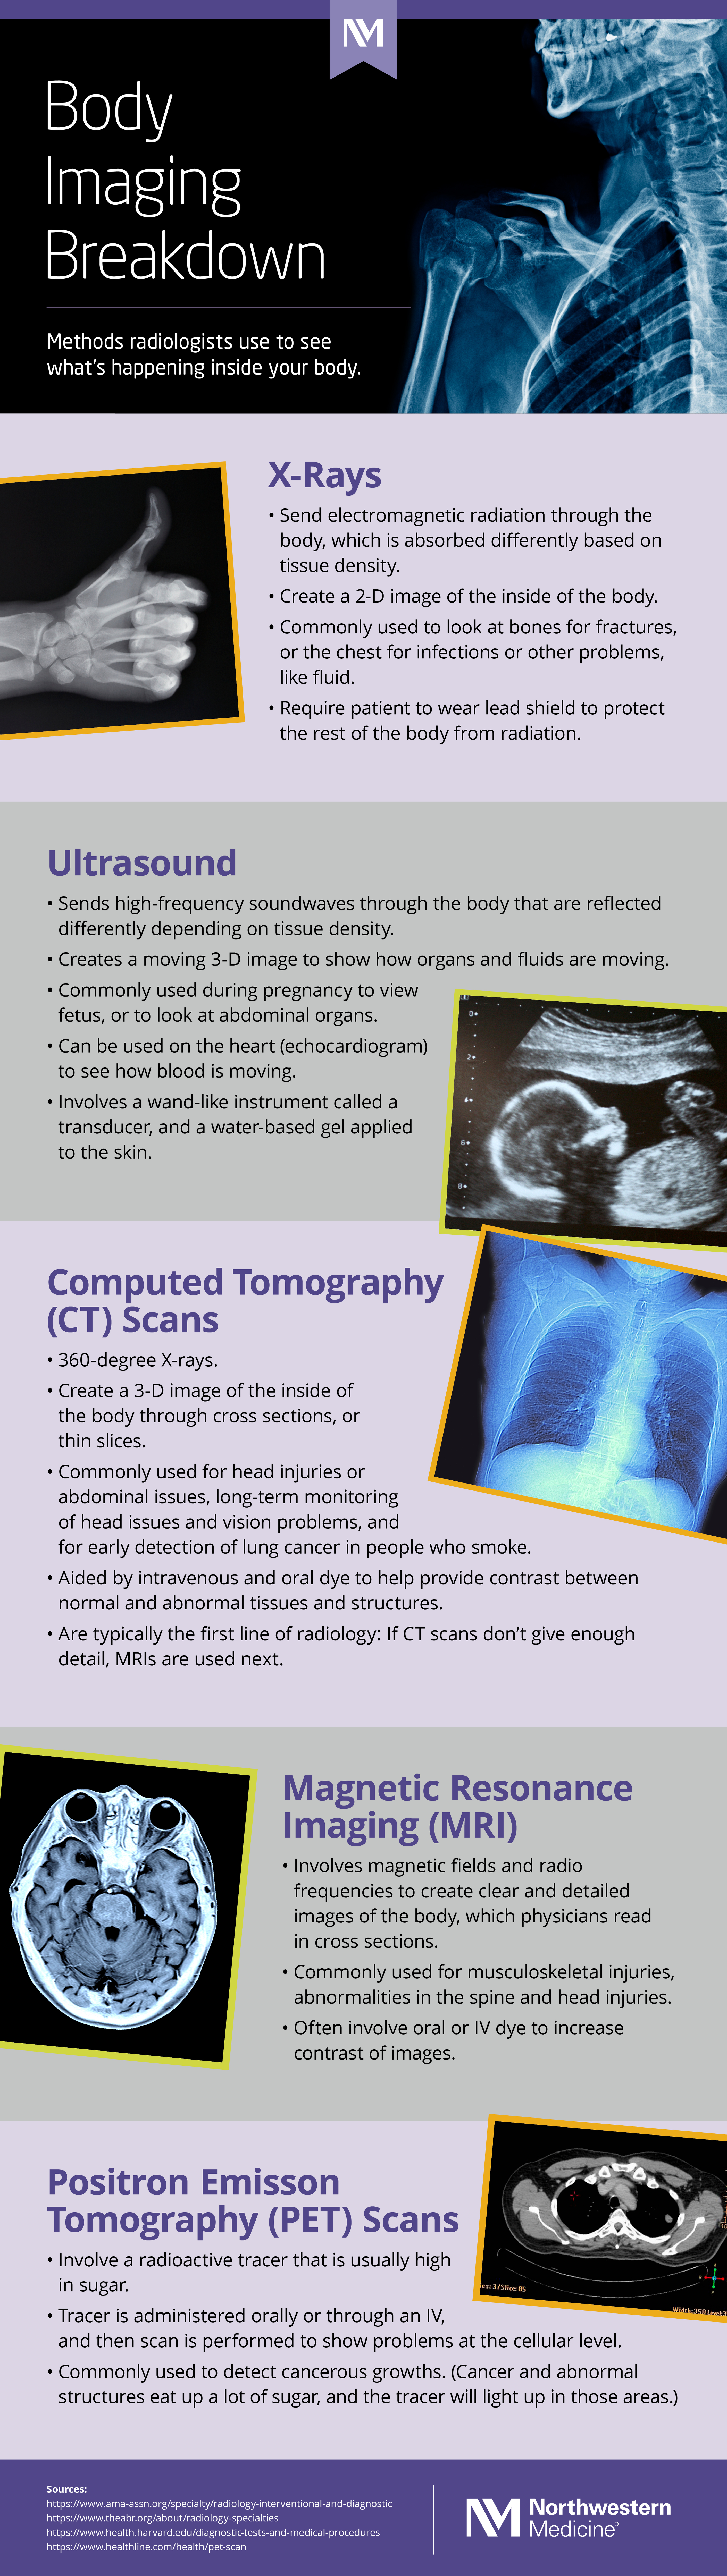 nm-body-imaging__Infographic